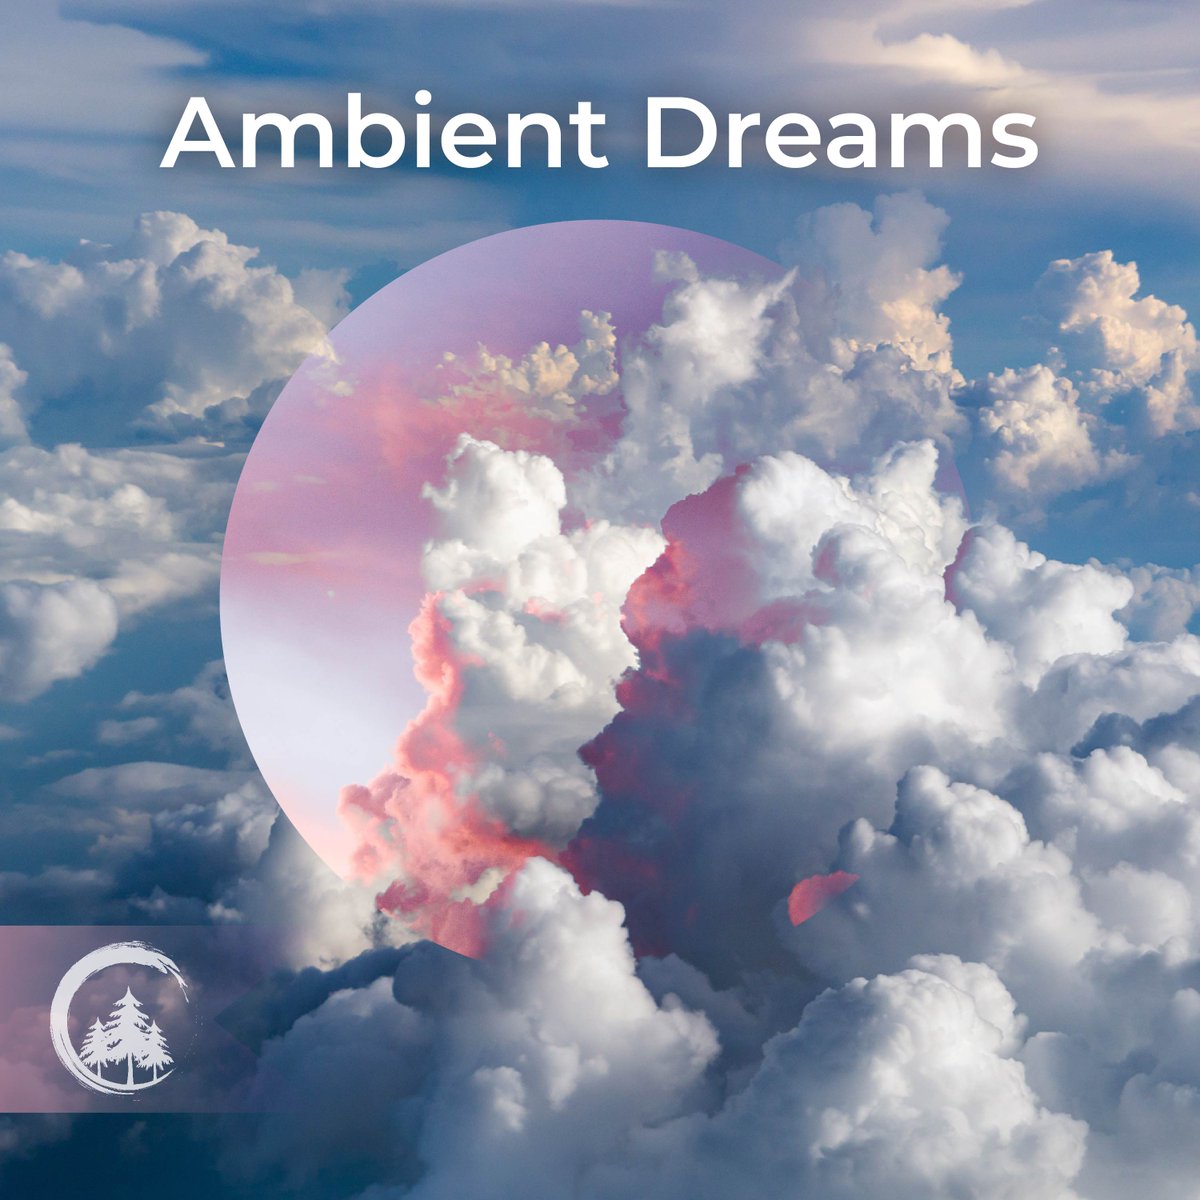 Ambient Dreams ~ Beautiful Ambient Music for Rest and Relaxation Find it here: ▶️🎧 vvr.streamlink.to/ADreams @ValleyVRecords #valleyviewrecords #playlist